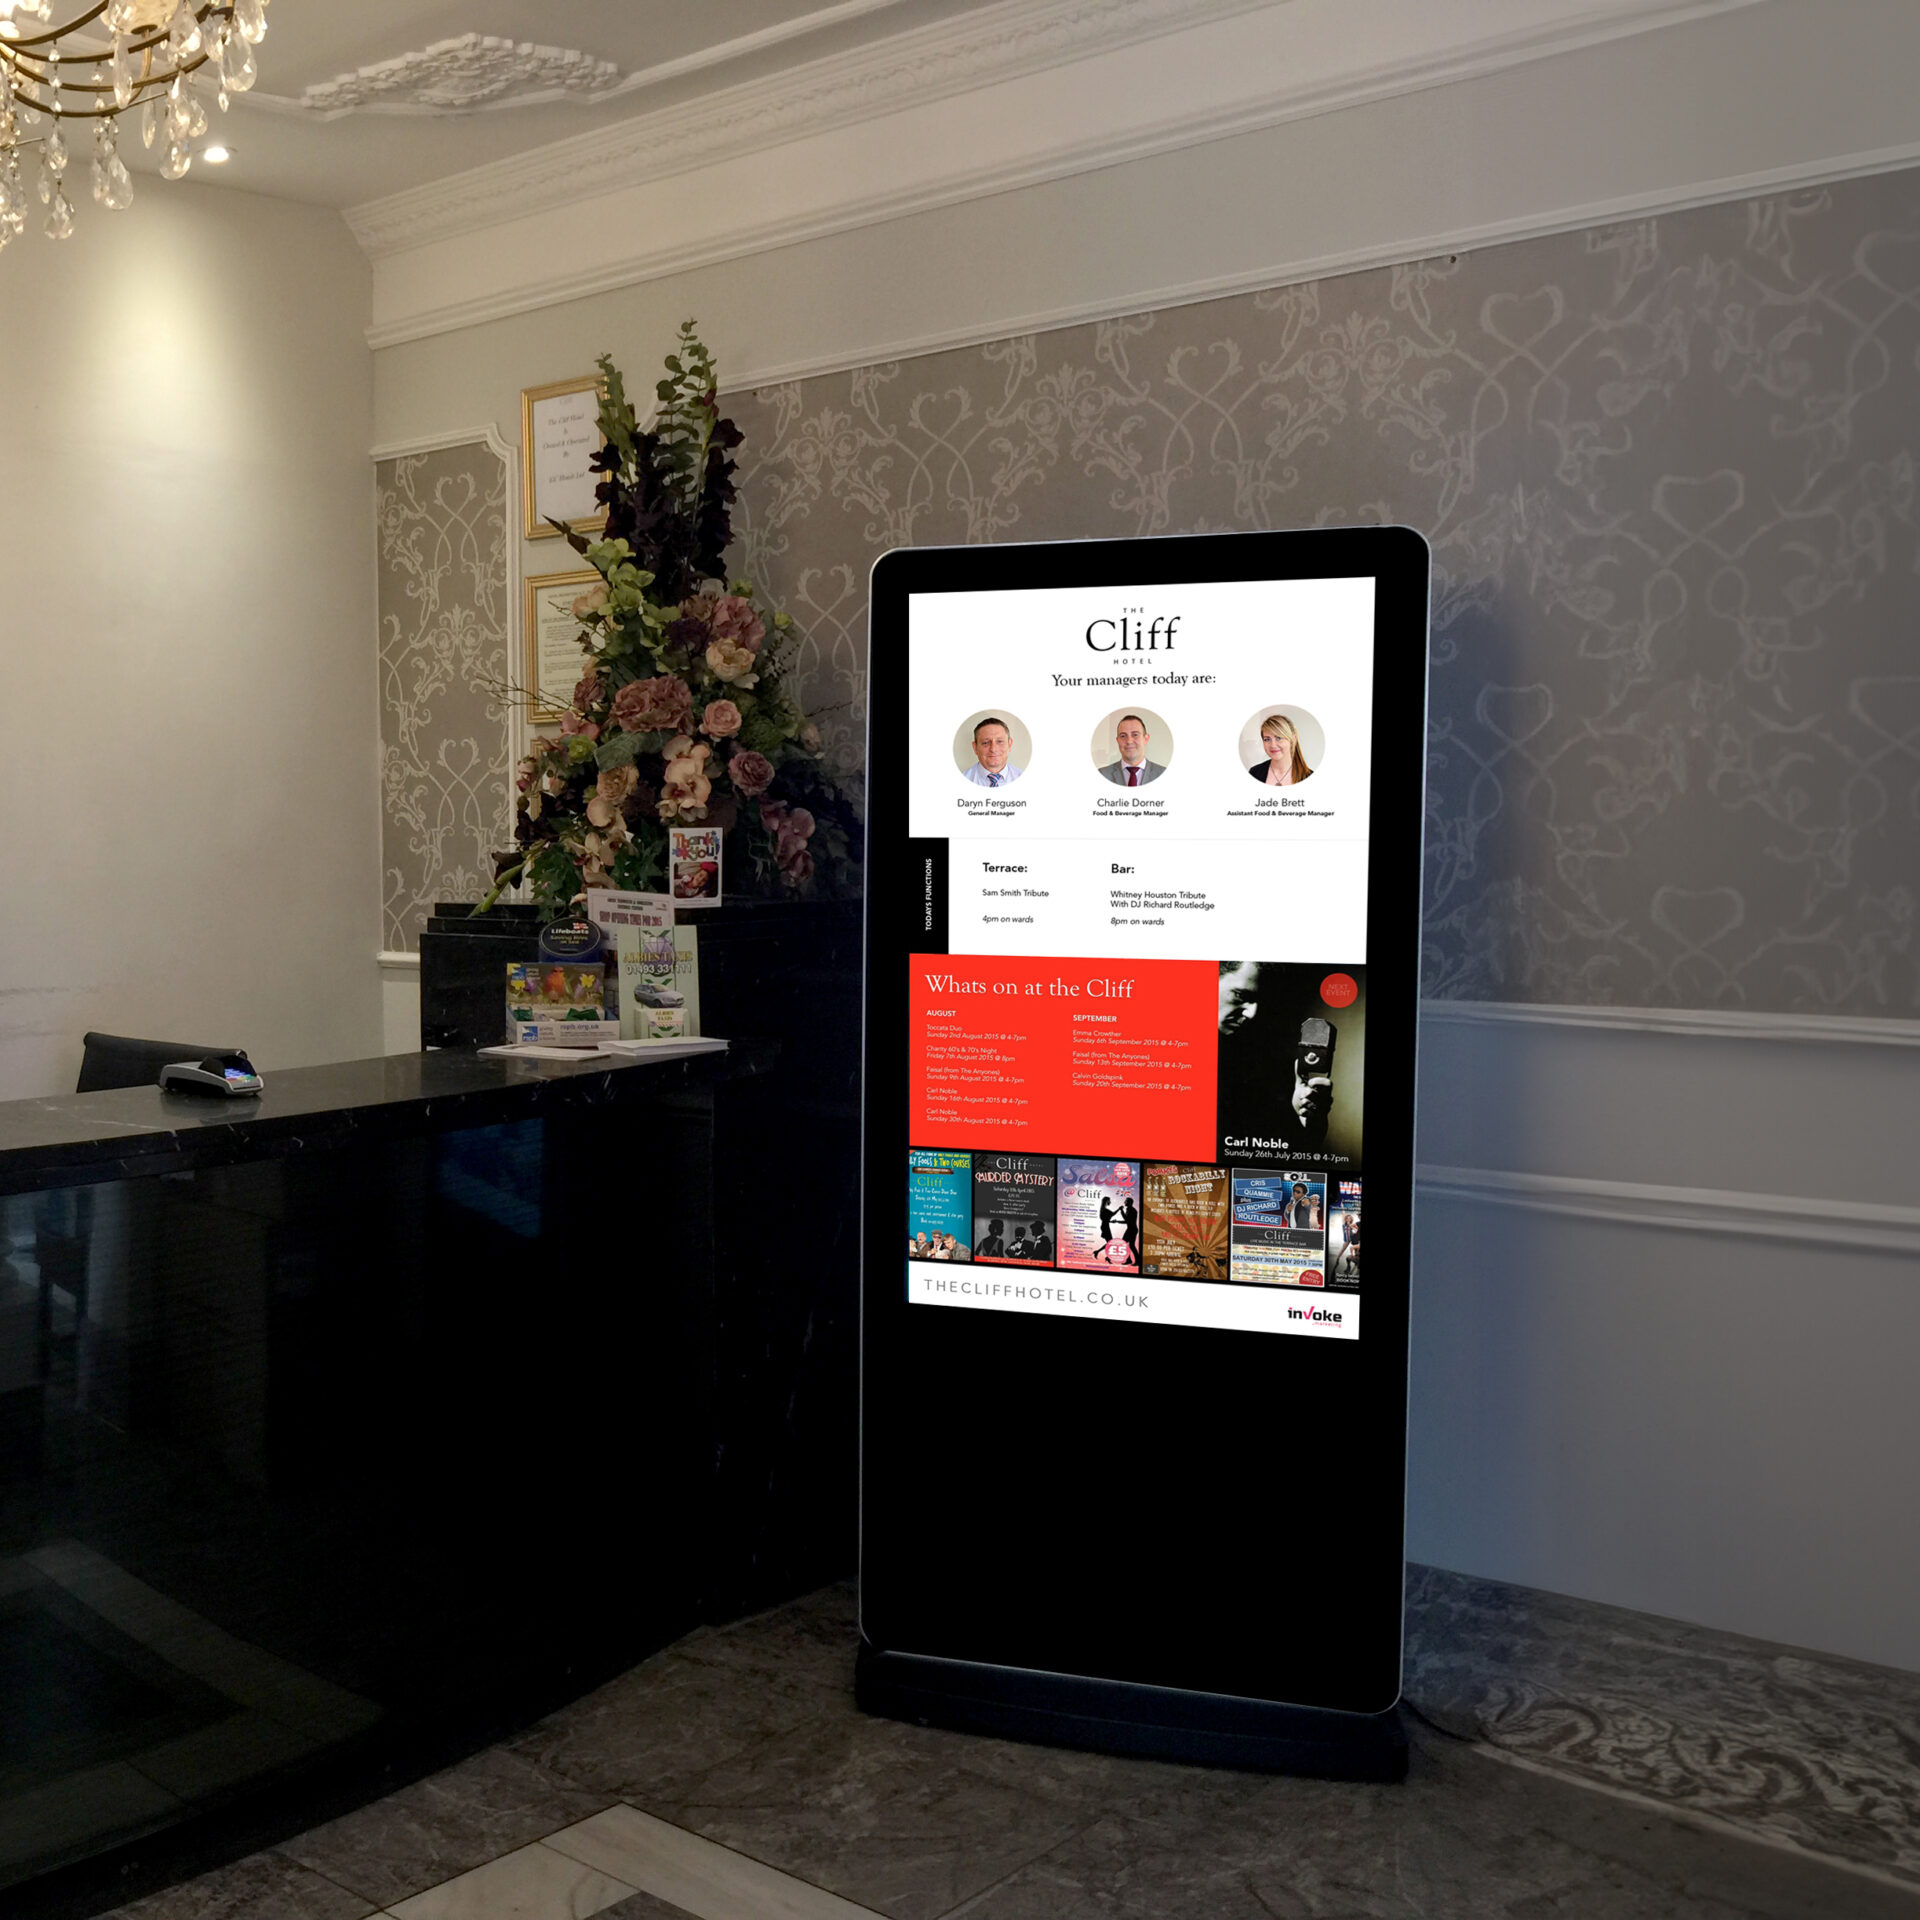 Cliff Hotel free standing screen in reception what is on at the hotel for guests to enjoy